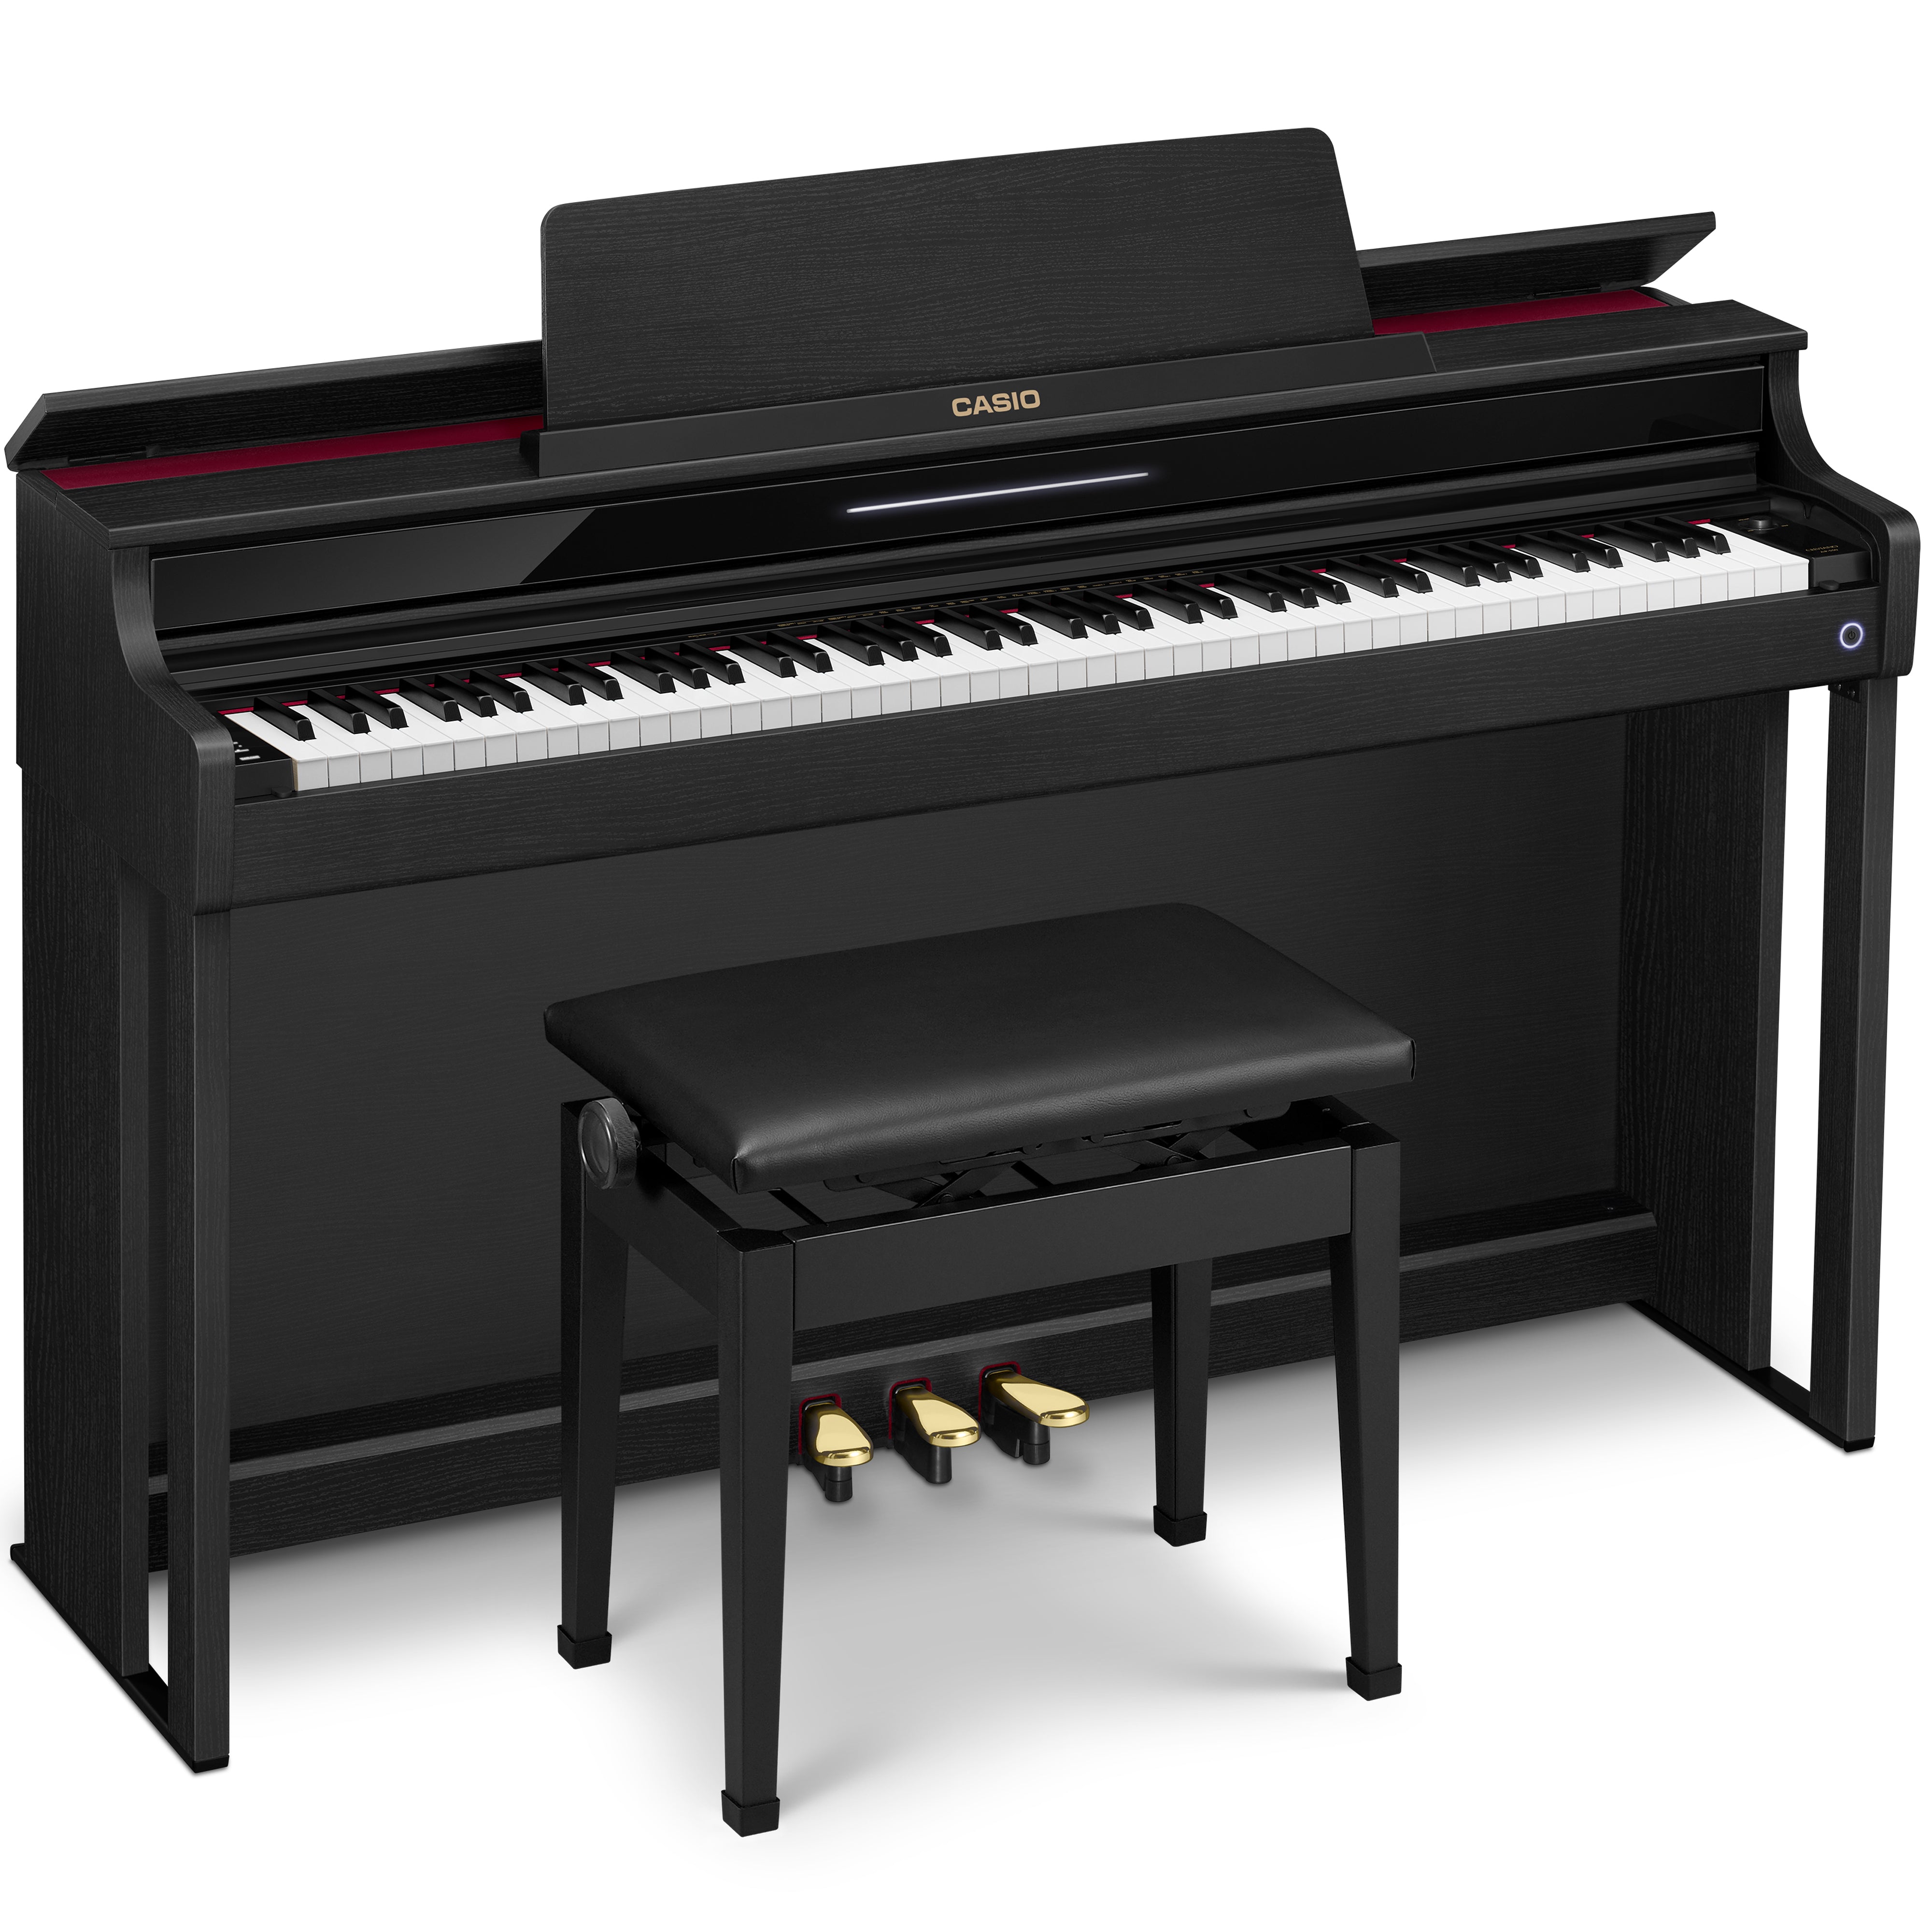 Casio Celviano AP-550 Digital Piano - Black - facing right with lid open and bench